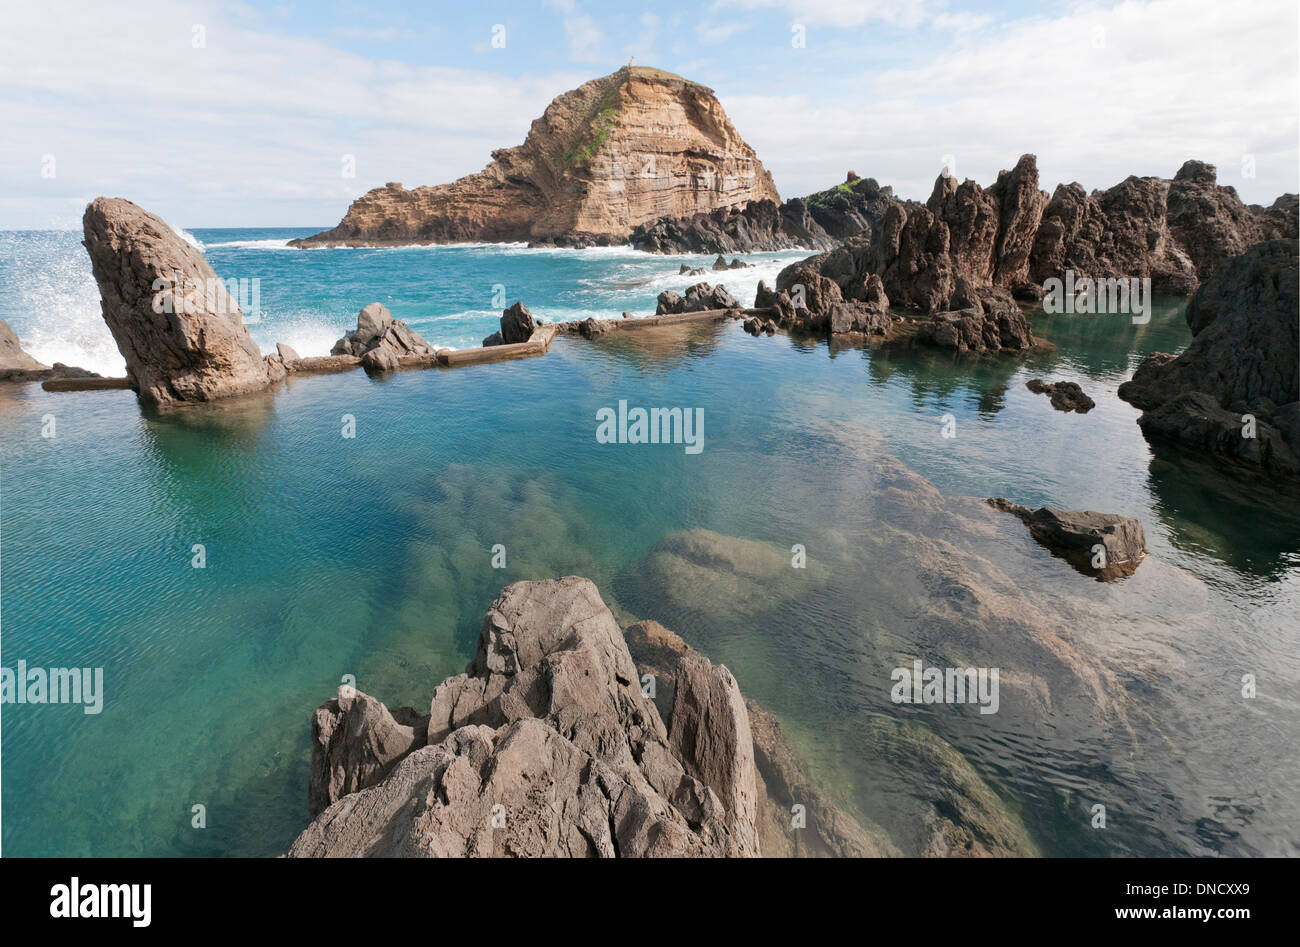 The natural rock swimming pools of Porto Moniz, Madiera, Portugal provide shelter from the Atlantic ocean Stock Photo